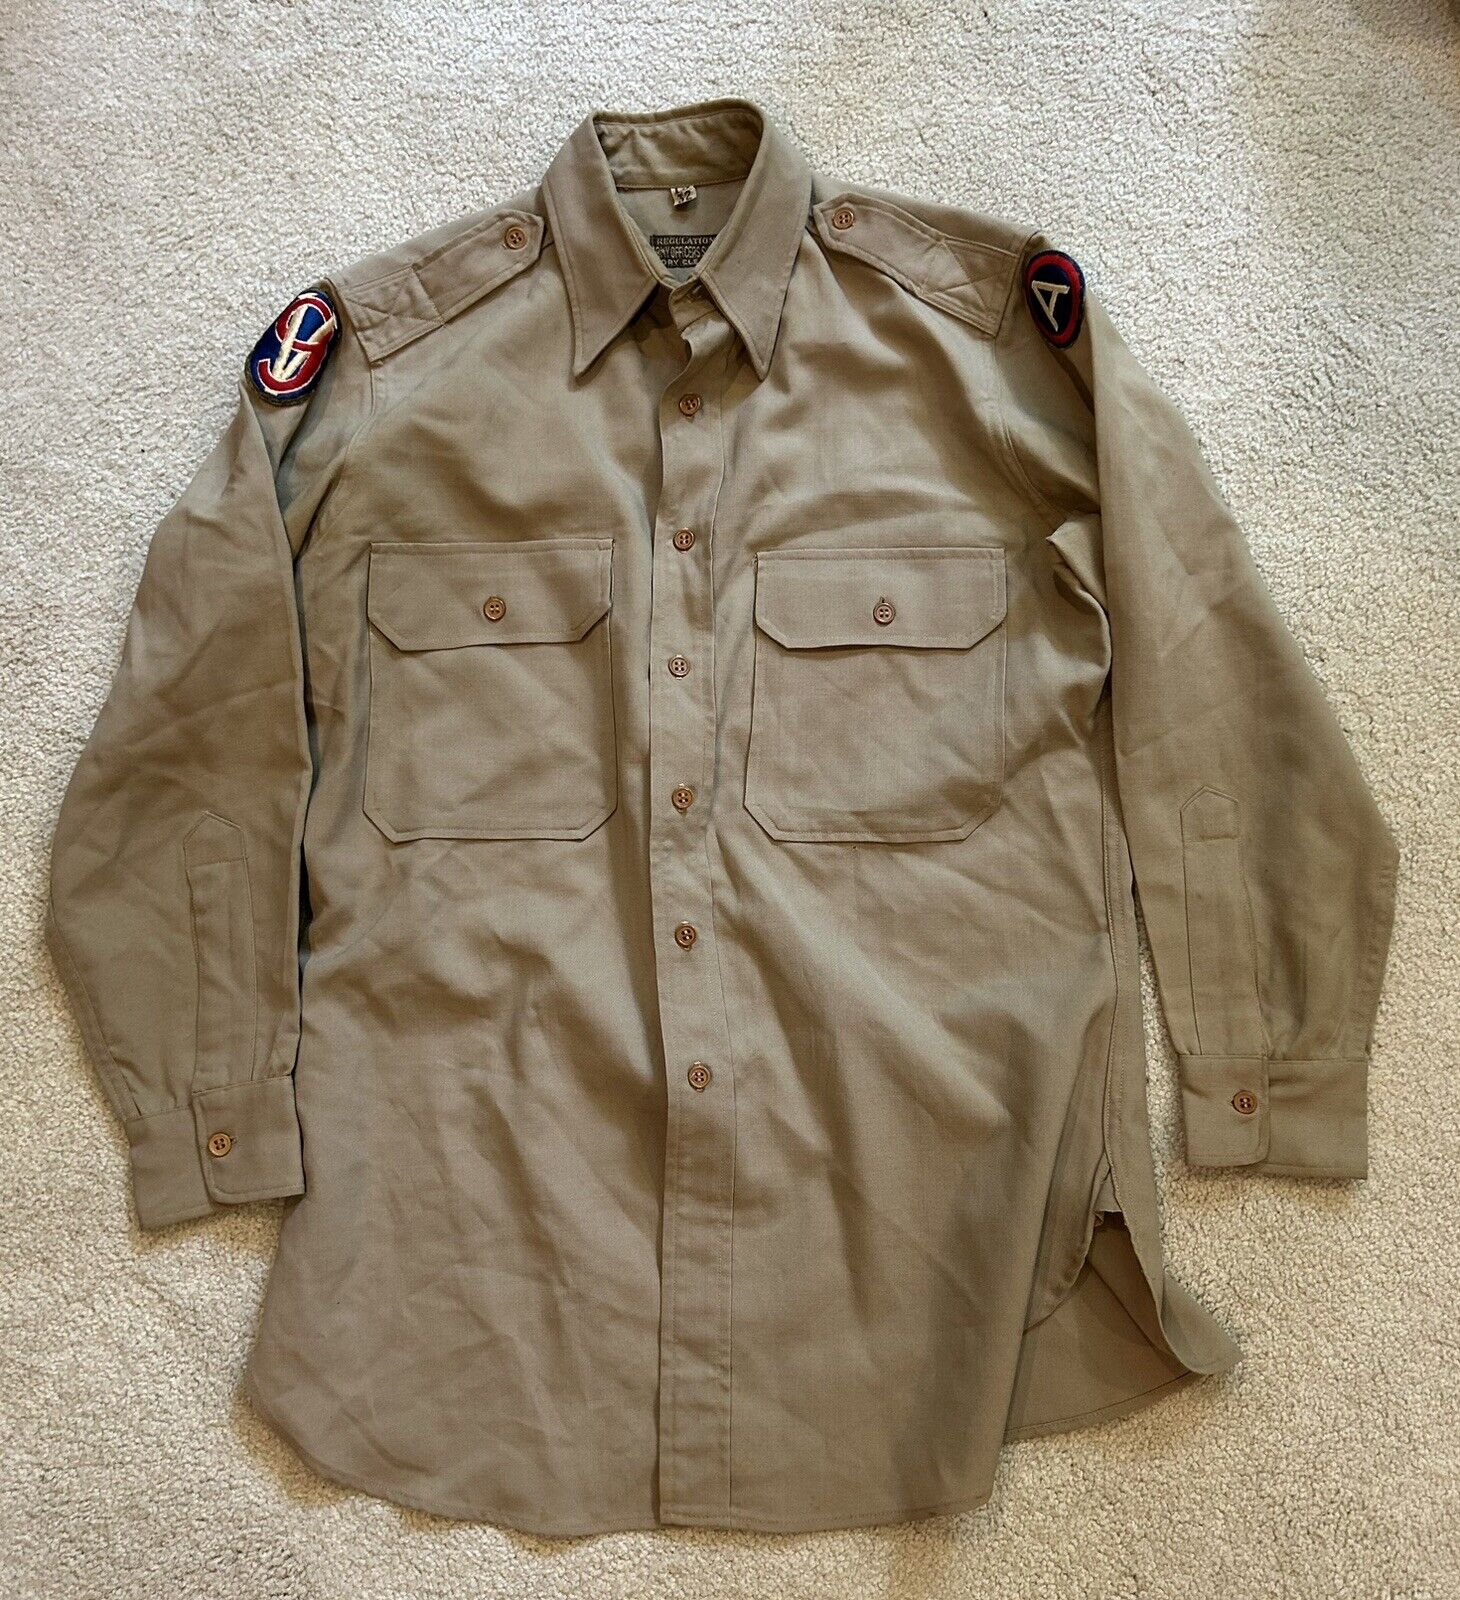 Vtg WW2 US Army Wool Officer's Shirt Regulation 95th Infantry Division 3rd